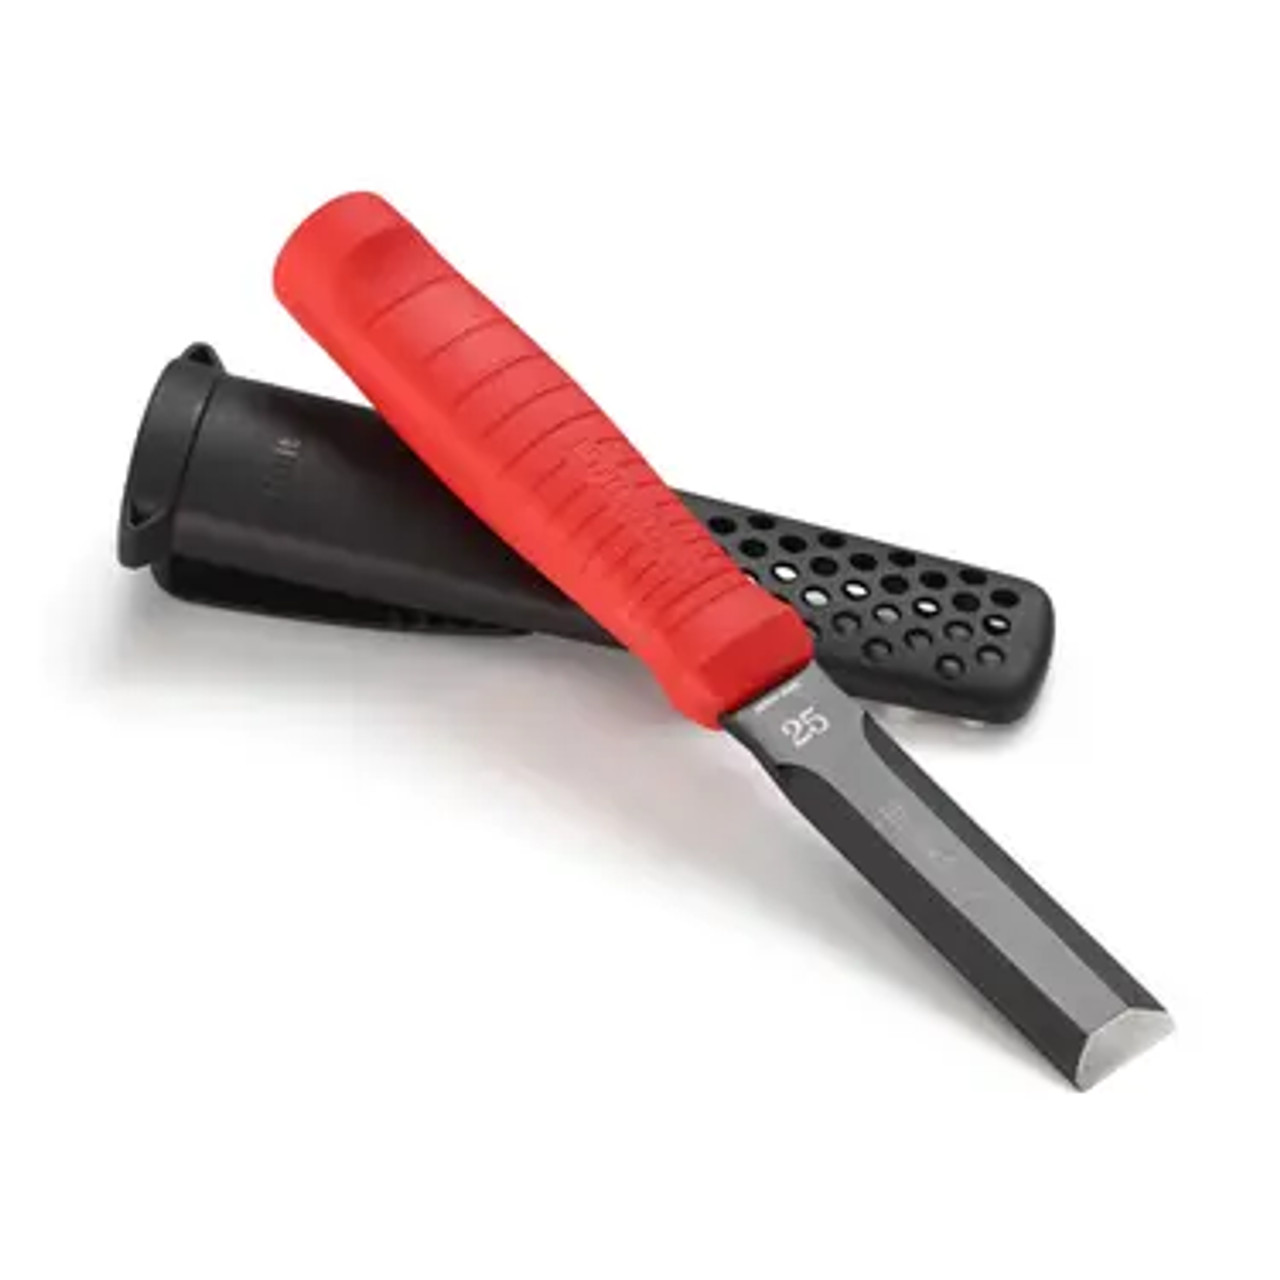 HULTAFORS Chisels EDC with Standard Chisel  for Woodworkers that have Standard Chisel  available in Australia and New Zealand